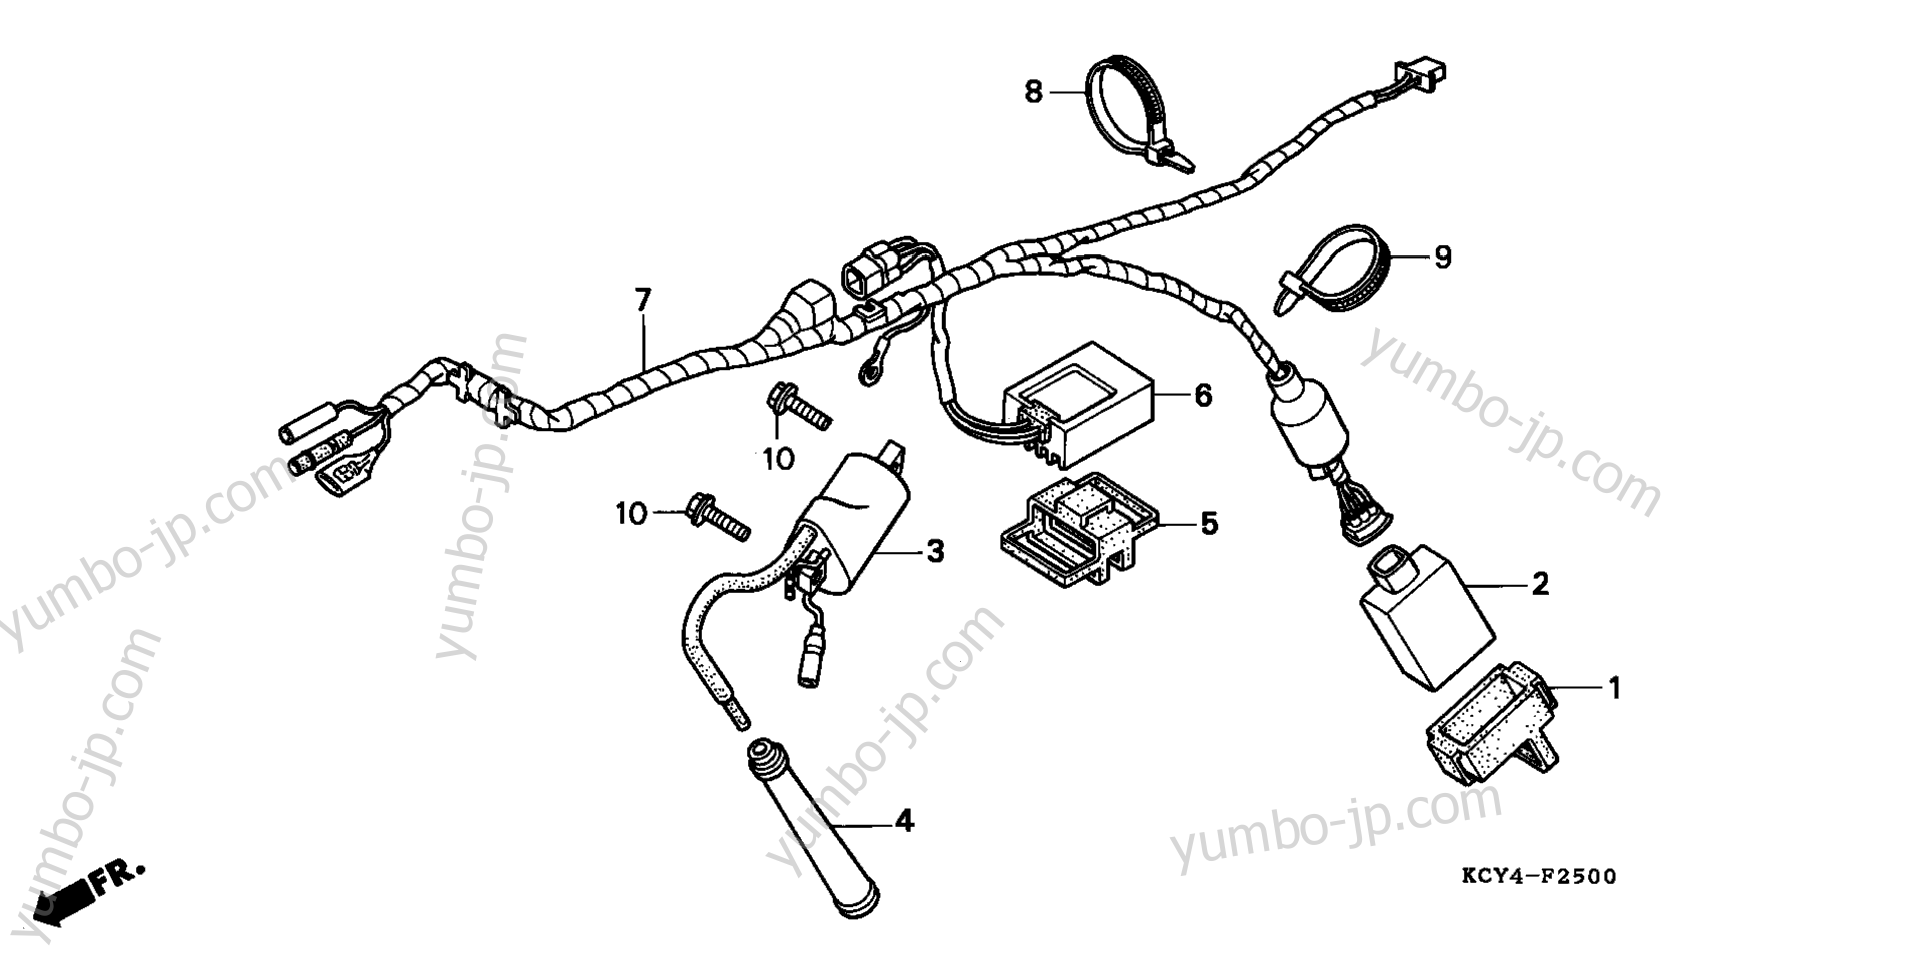 WIRE HARNESS for motorcycles HONDA XR400R A/A 1998 year